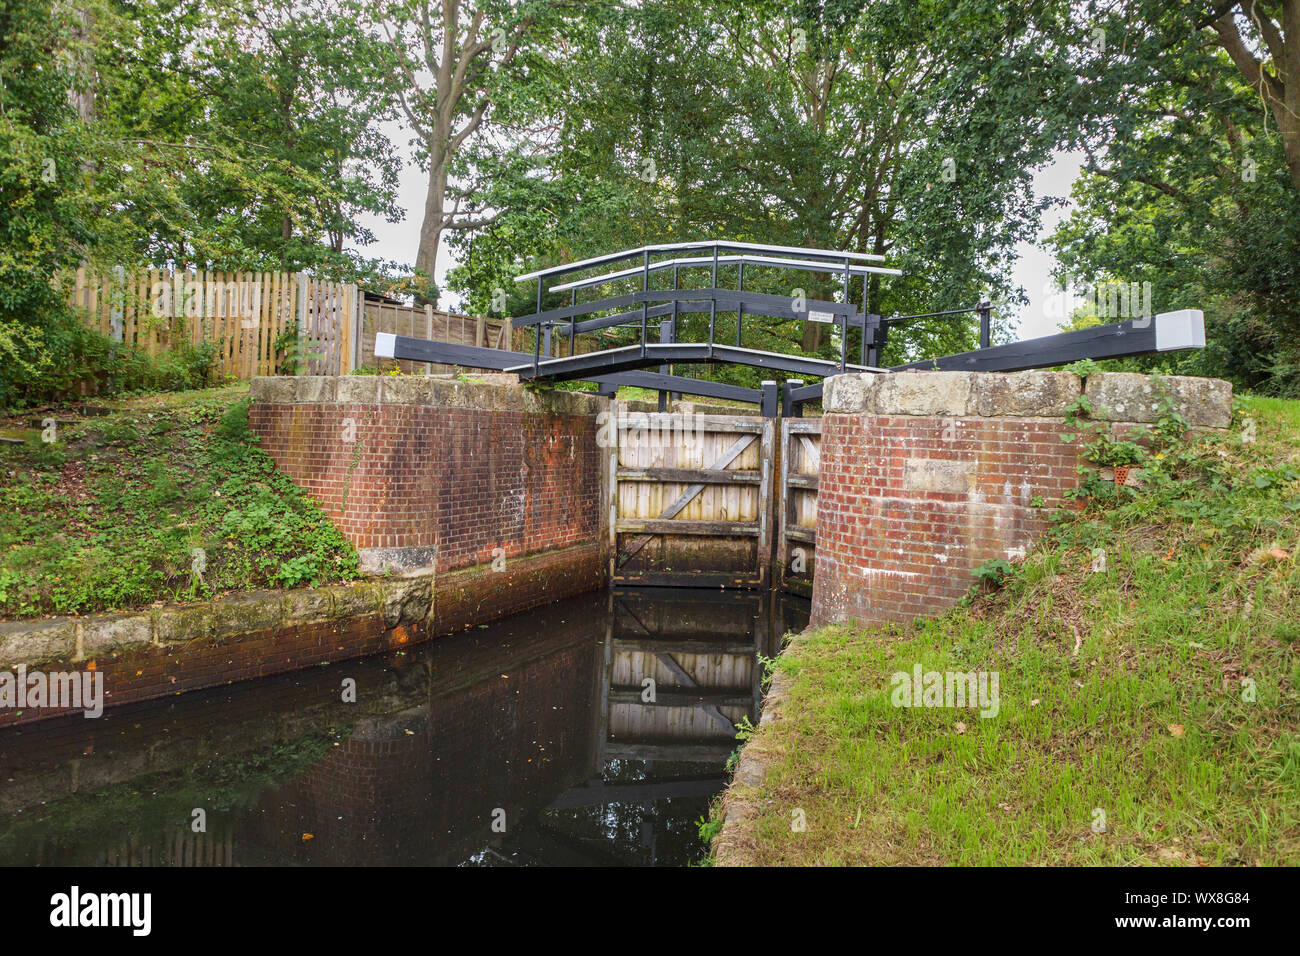 Typical pound lock with brick walls and wooden gates on the Basingstoke Canal and towpath, Knaphill, Woking, Surrey, southeast England, UK Stock Photo